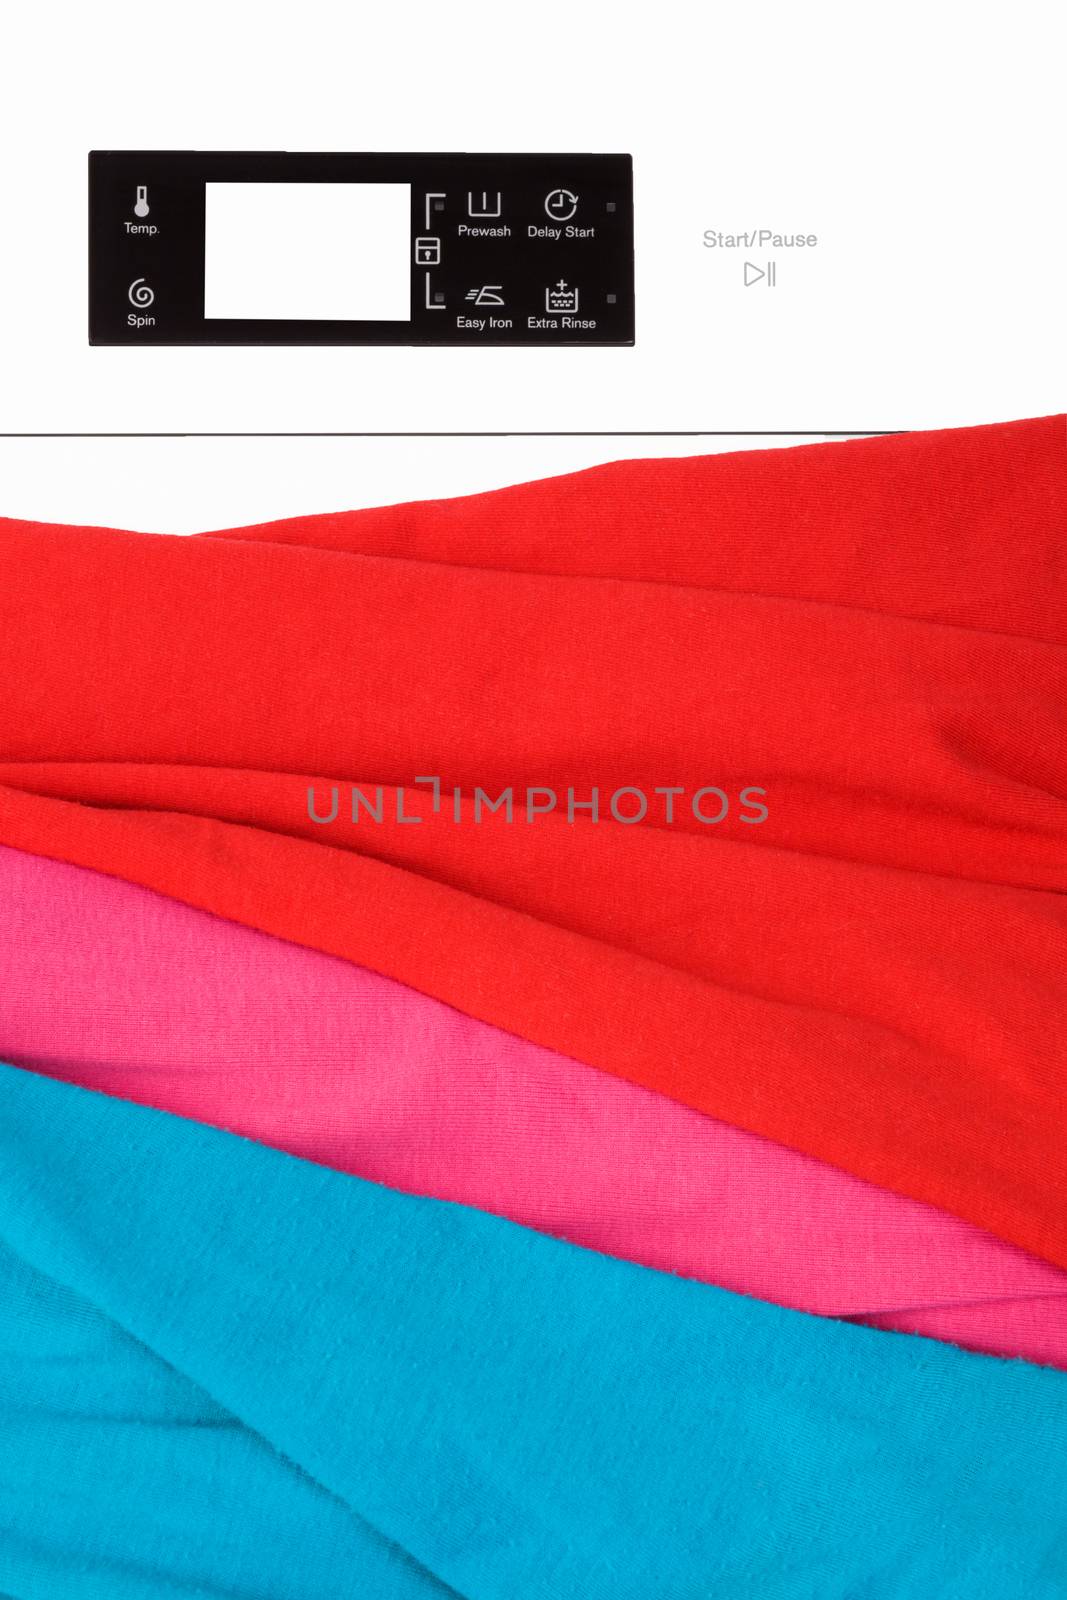 Laundry background. Top loading washing machine with natural organic detergent and colorful clothing, top view.